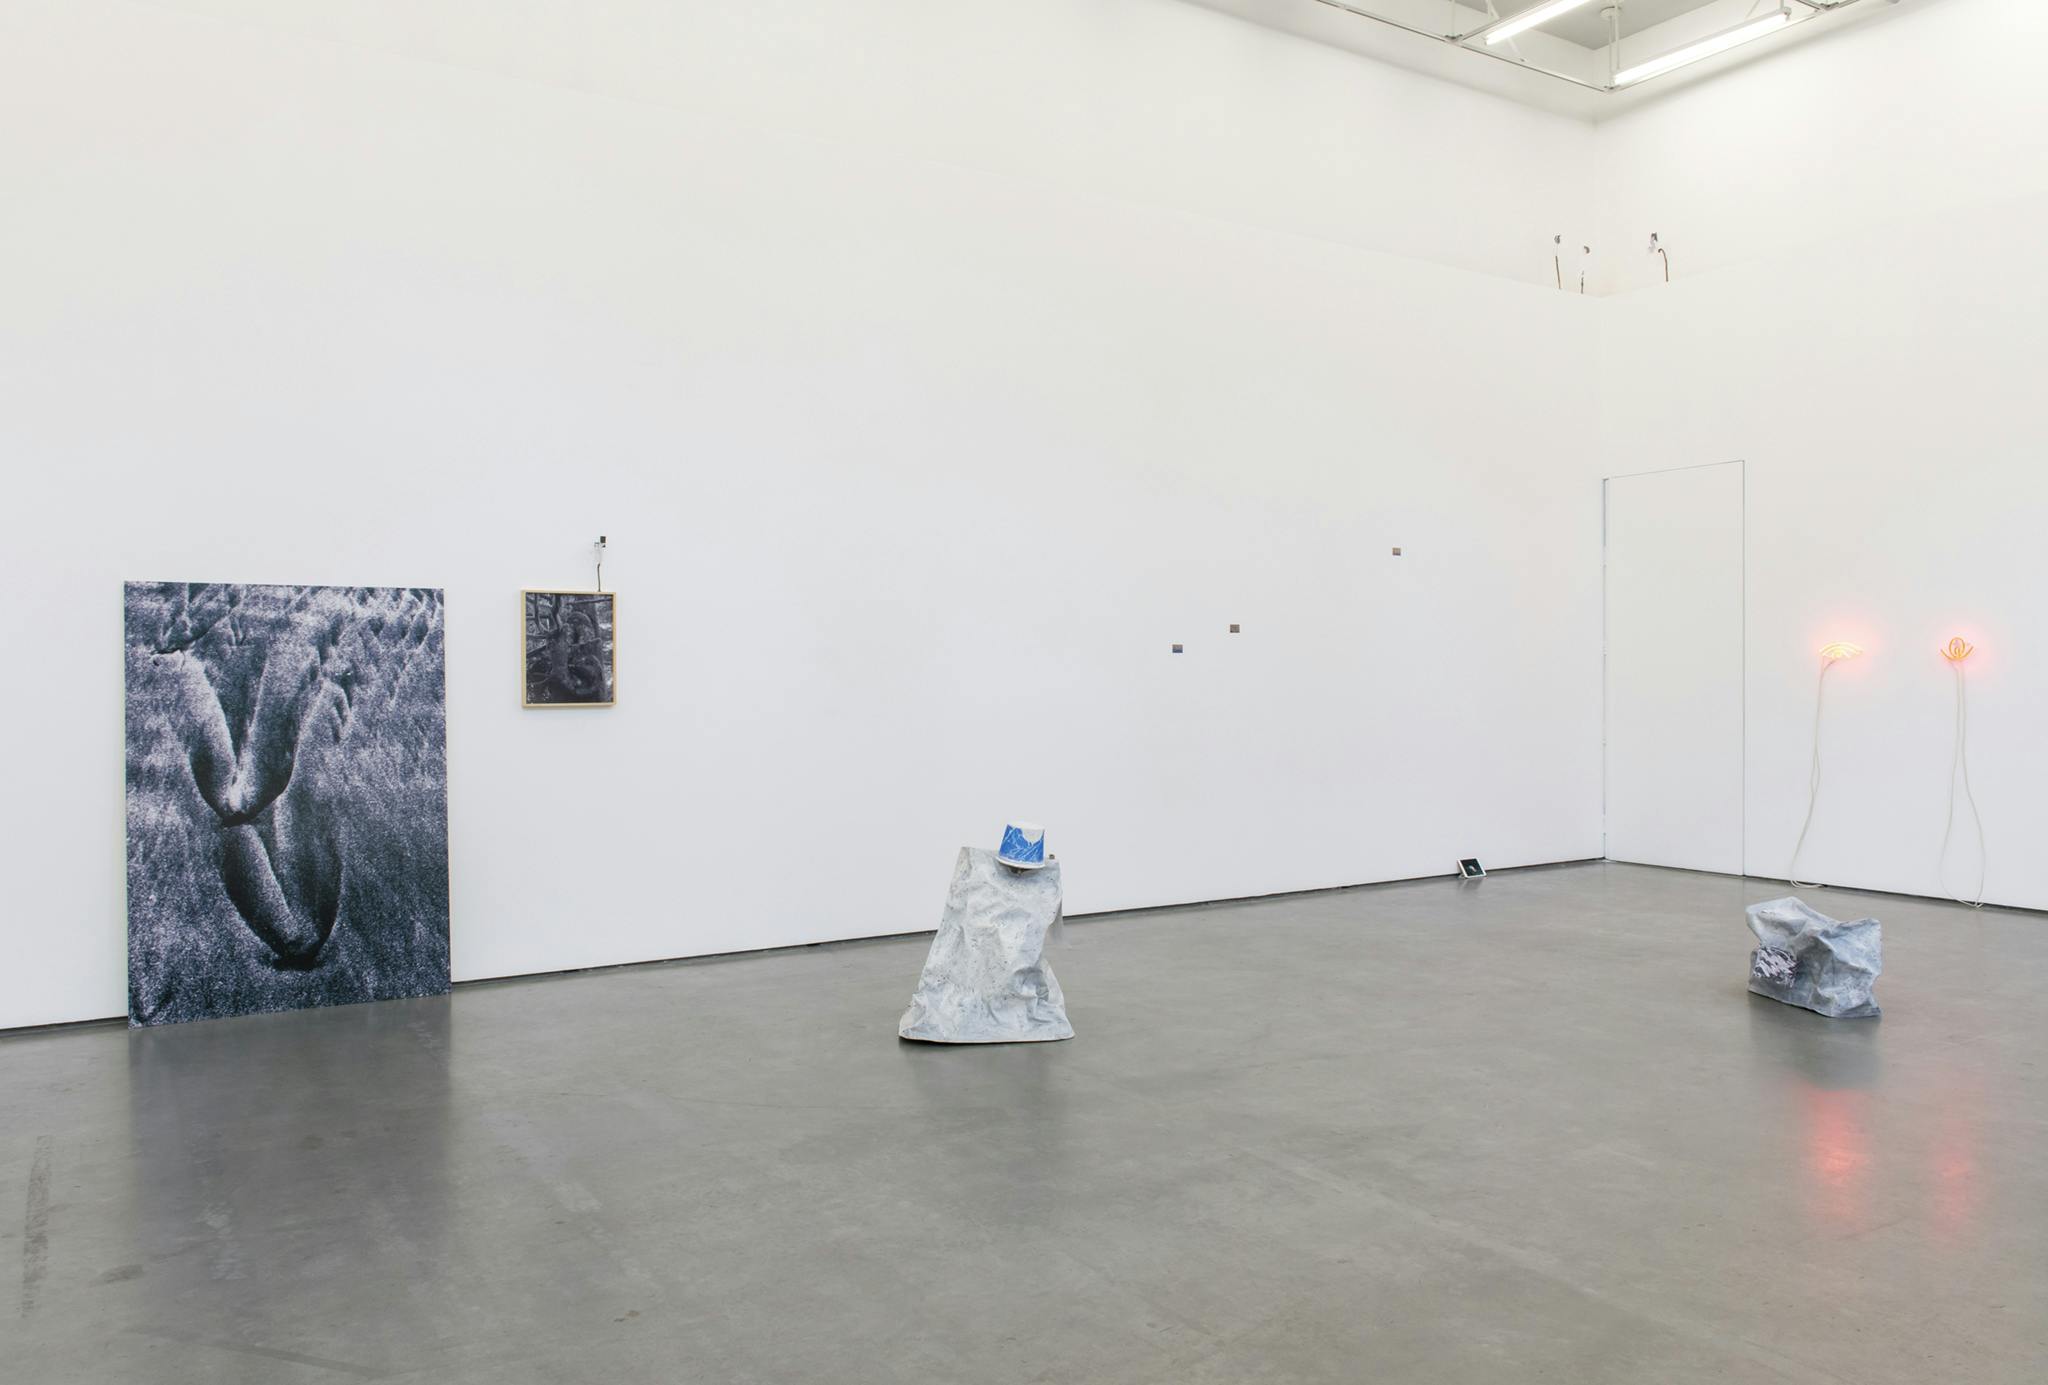 Installation image of the group show The Blue Hour. There are various works that range from sculptural pieces sitting on the floor, neon light fixtures installed on the wall, and photographic works. 